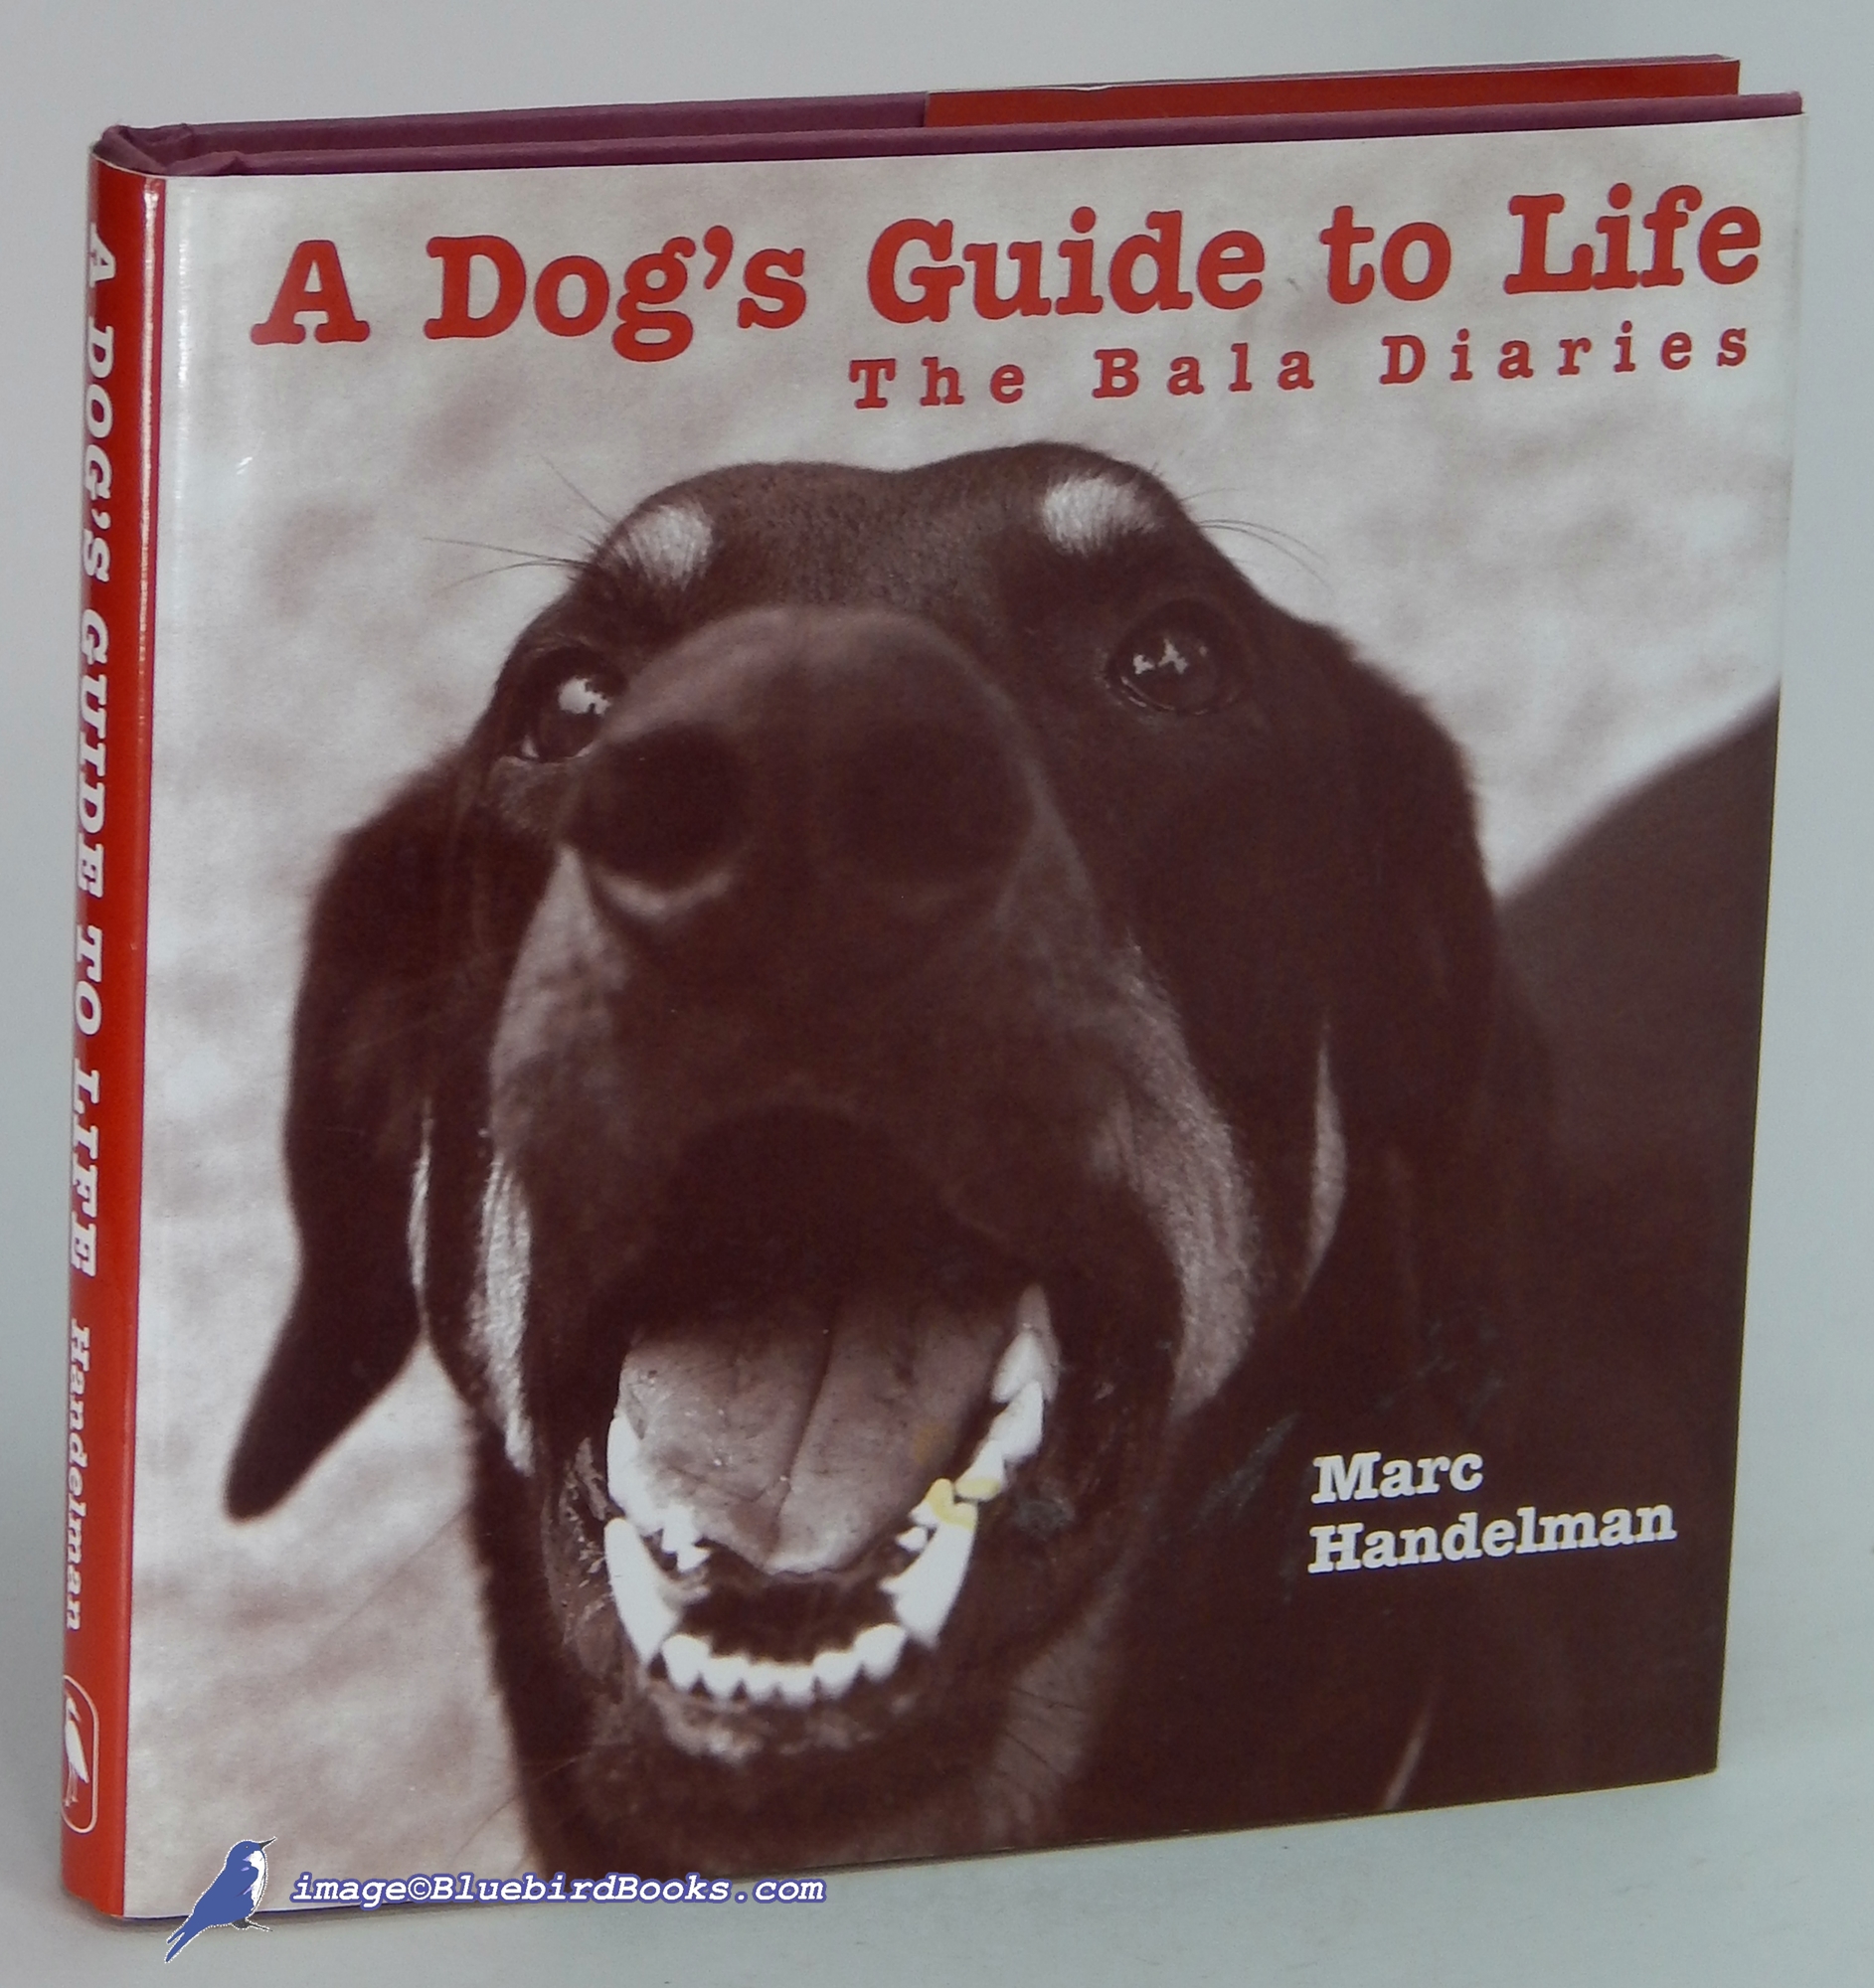 HANDELMAN, MARC - A Dog's Guide to Life: The Bala Diaries